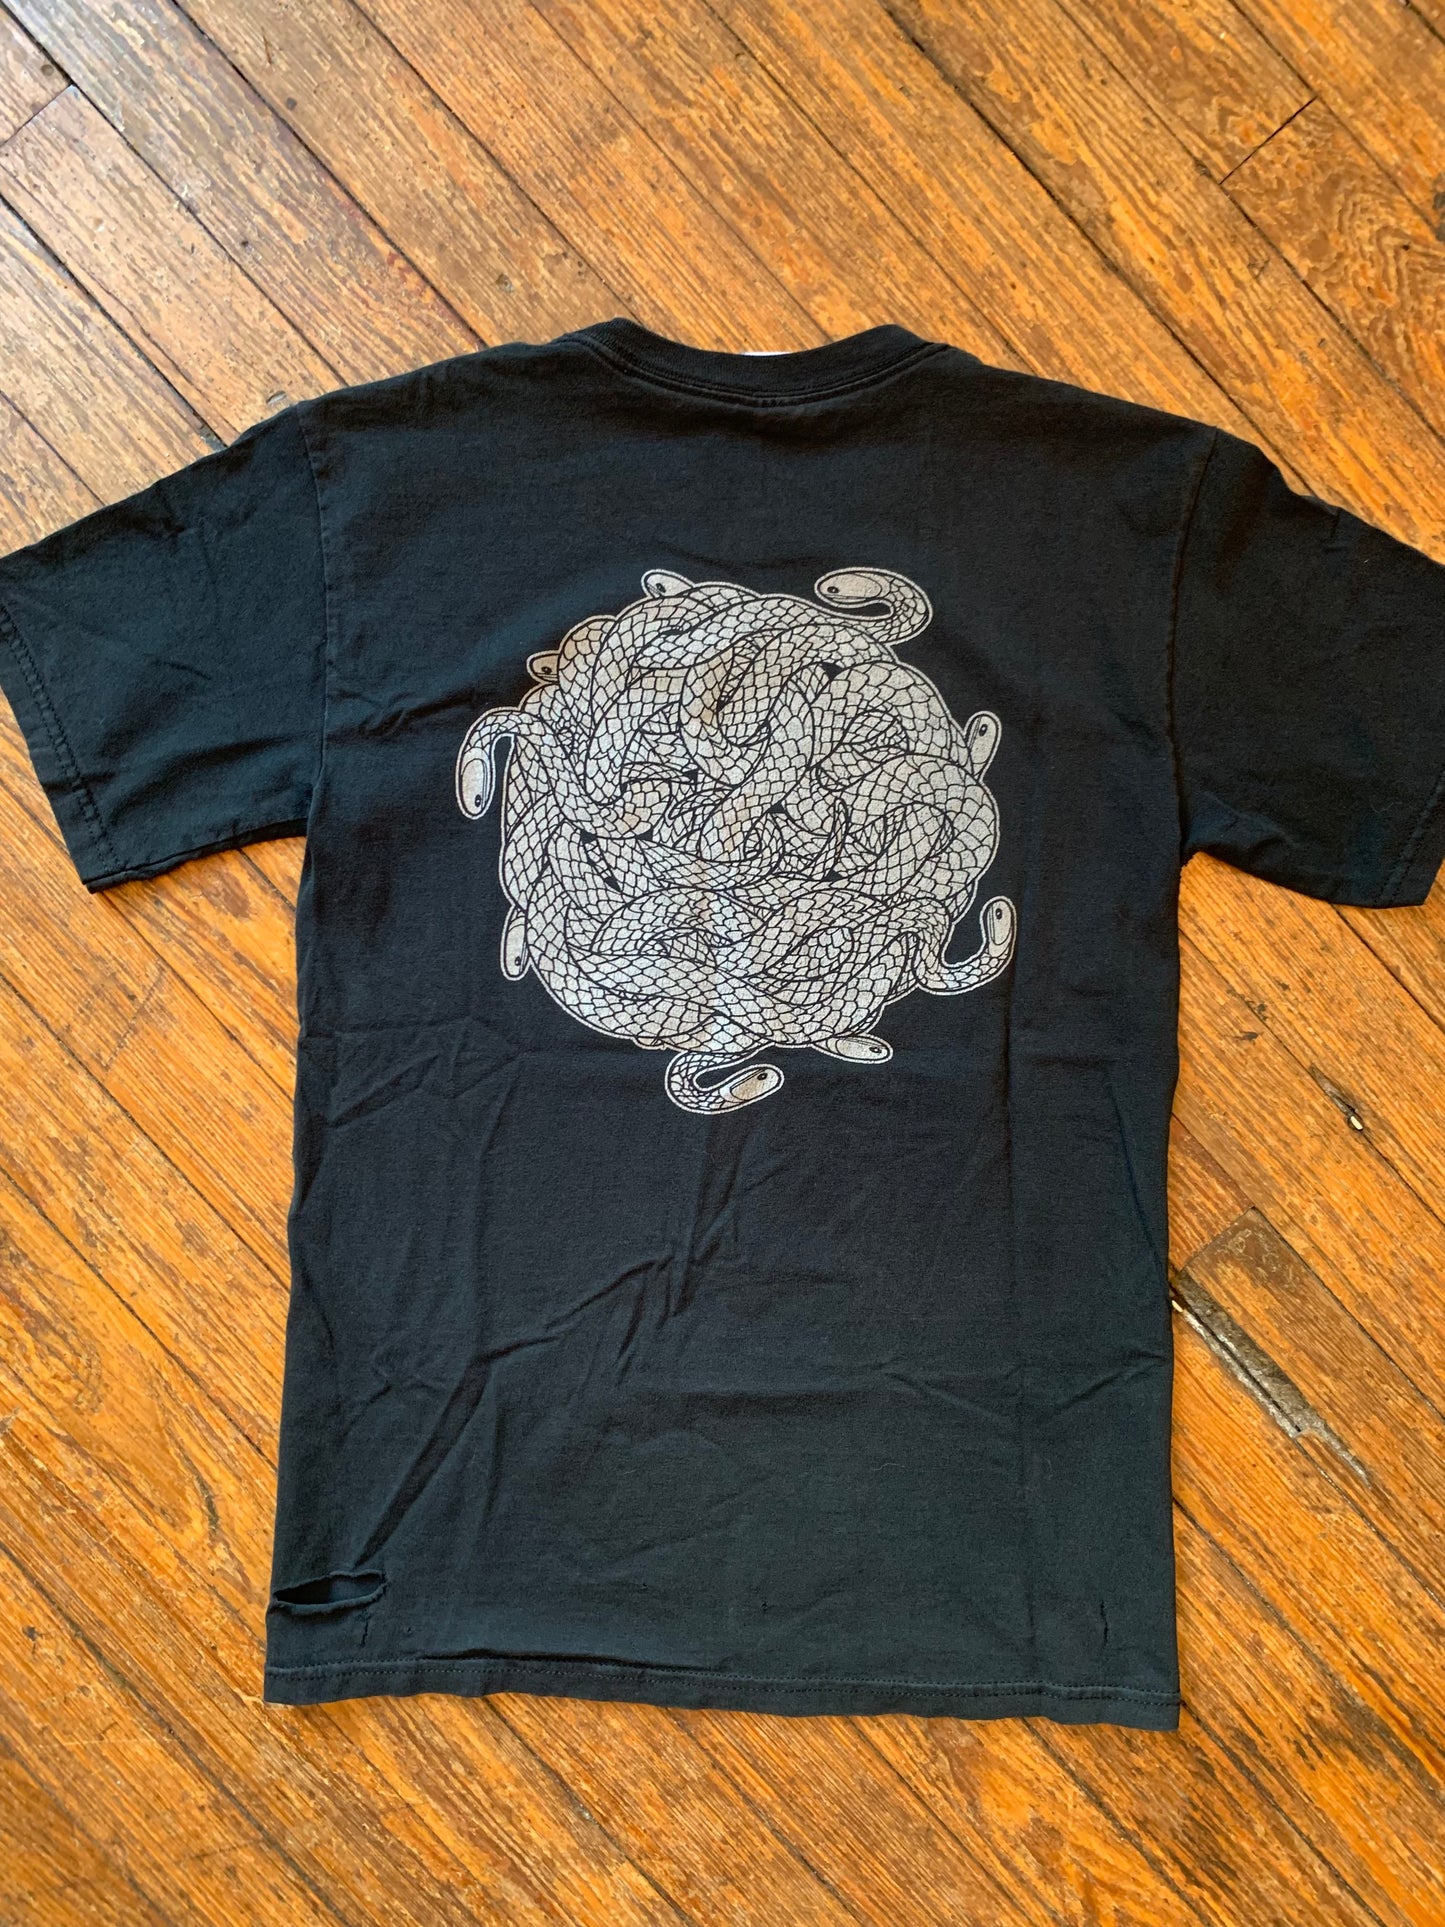 2005 Baroness ‘Second’ T-shirt